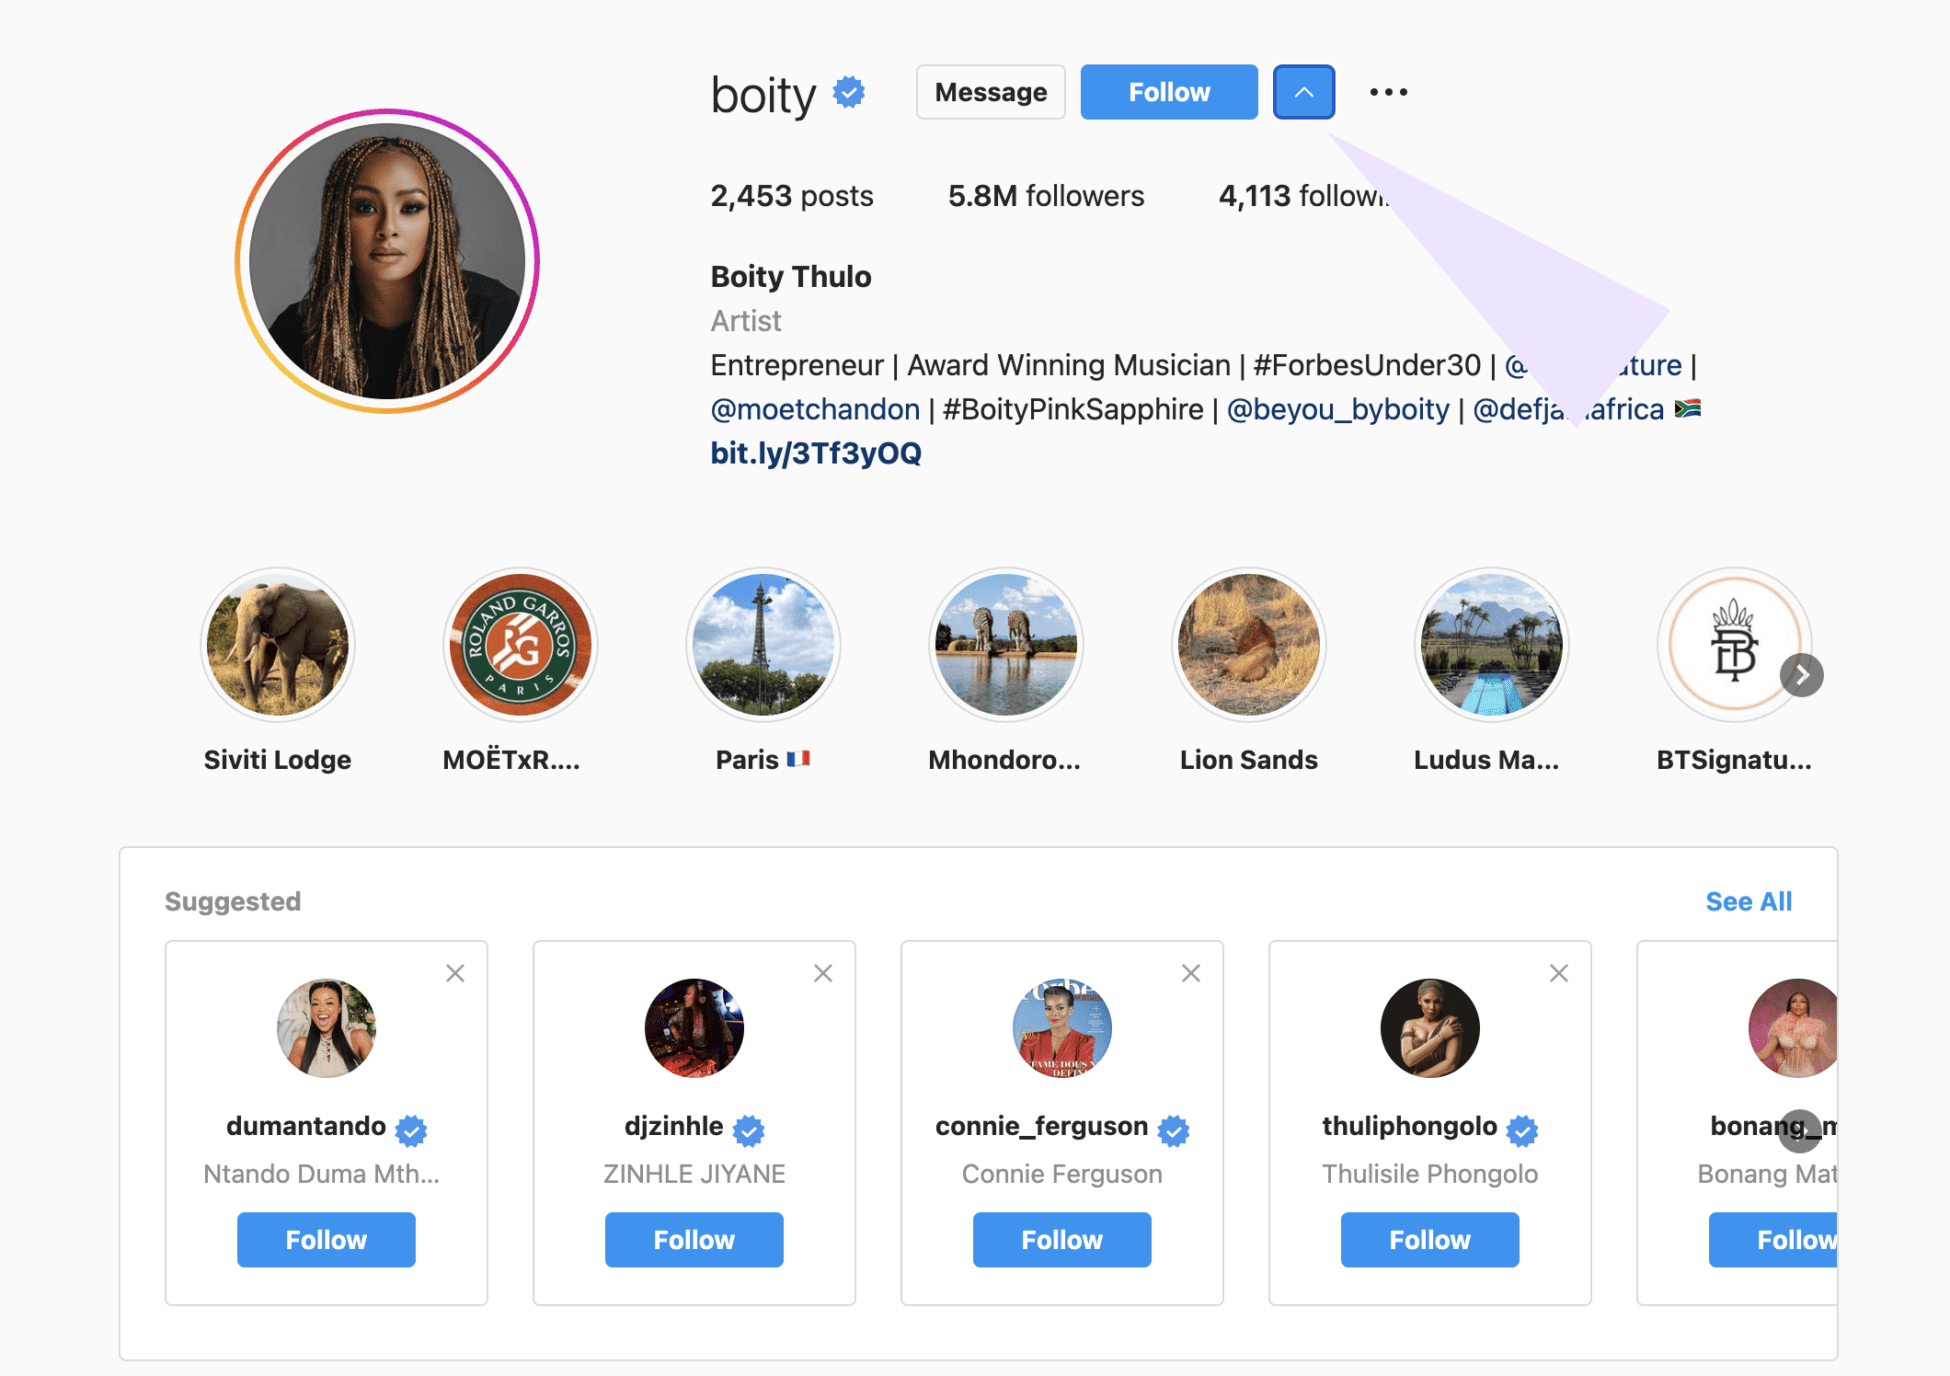 South African influencers: boity similar accounts on Instagram